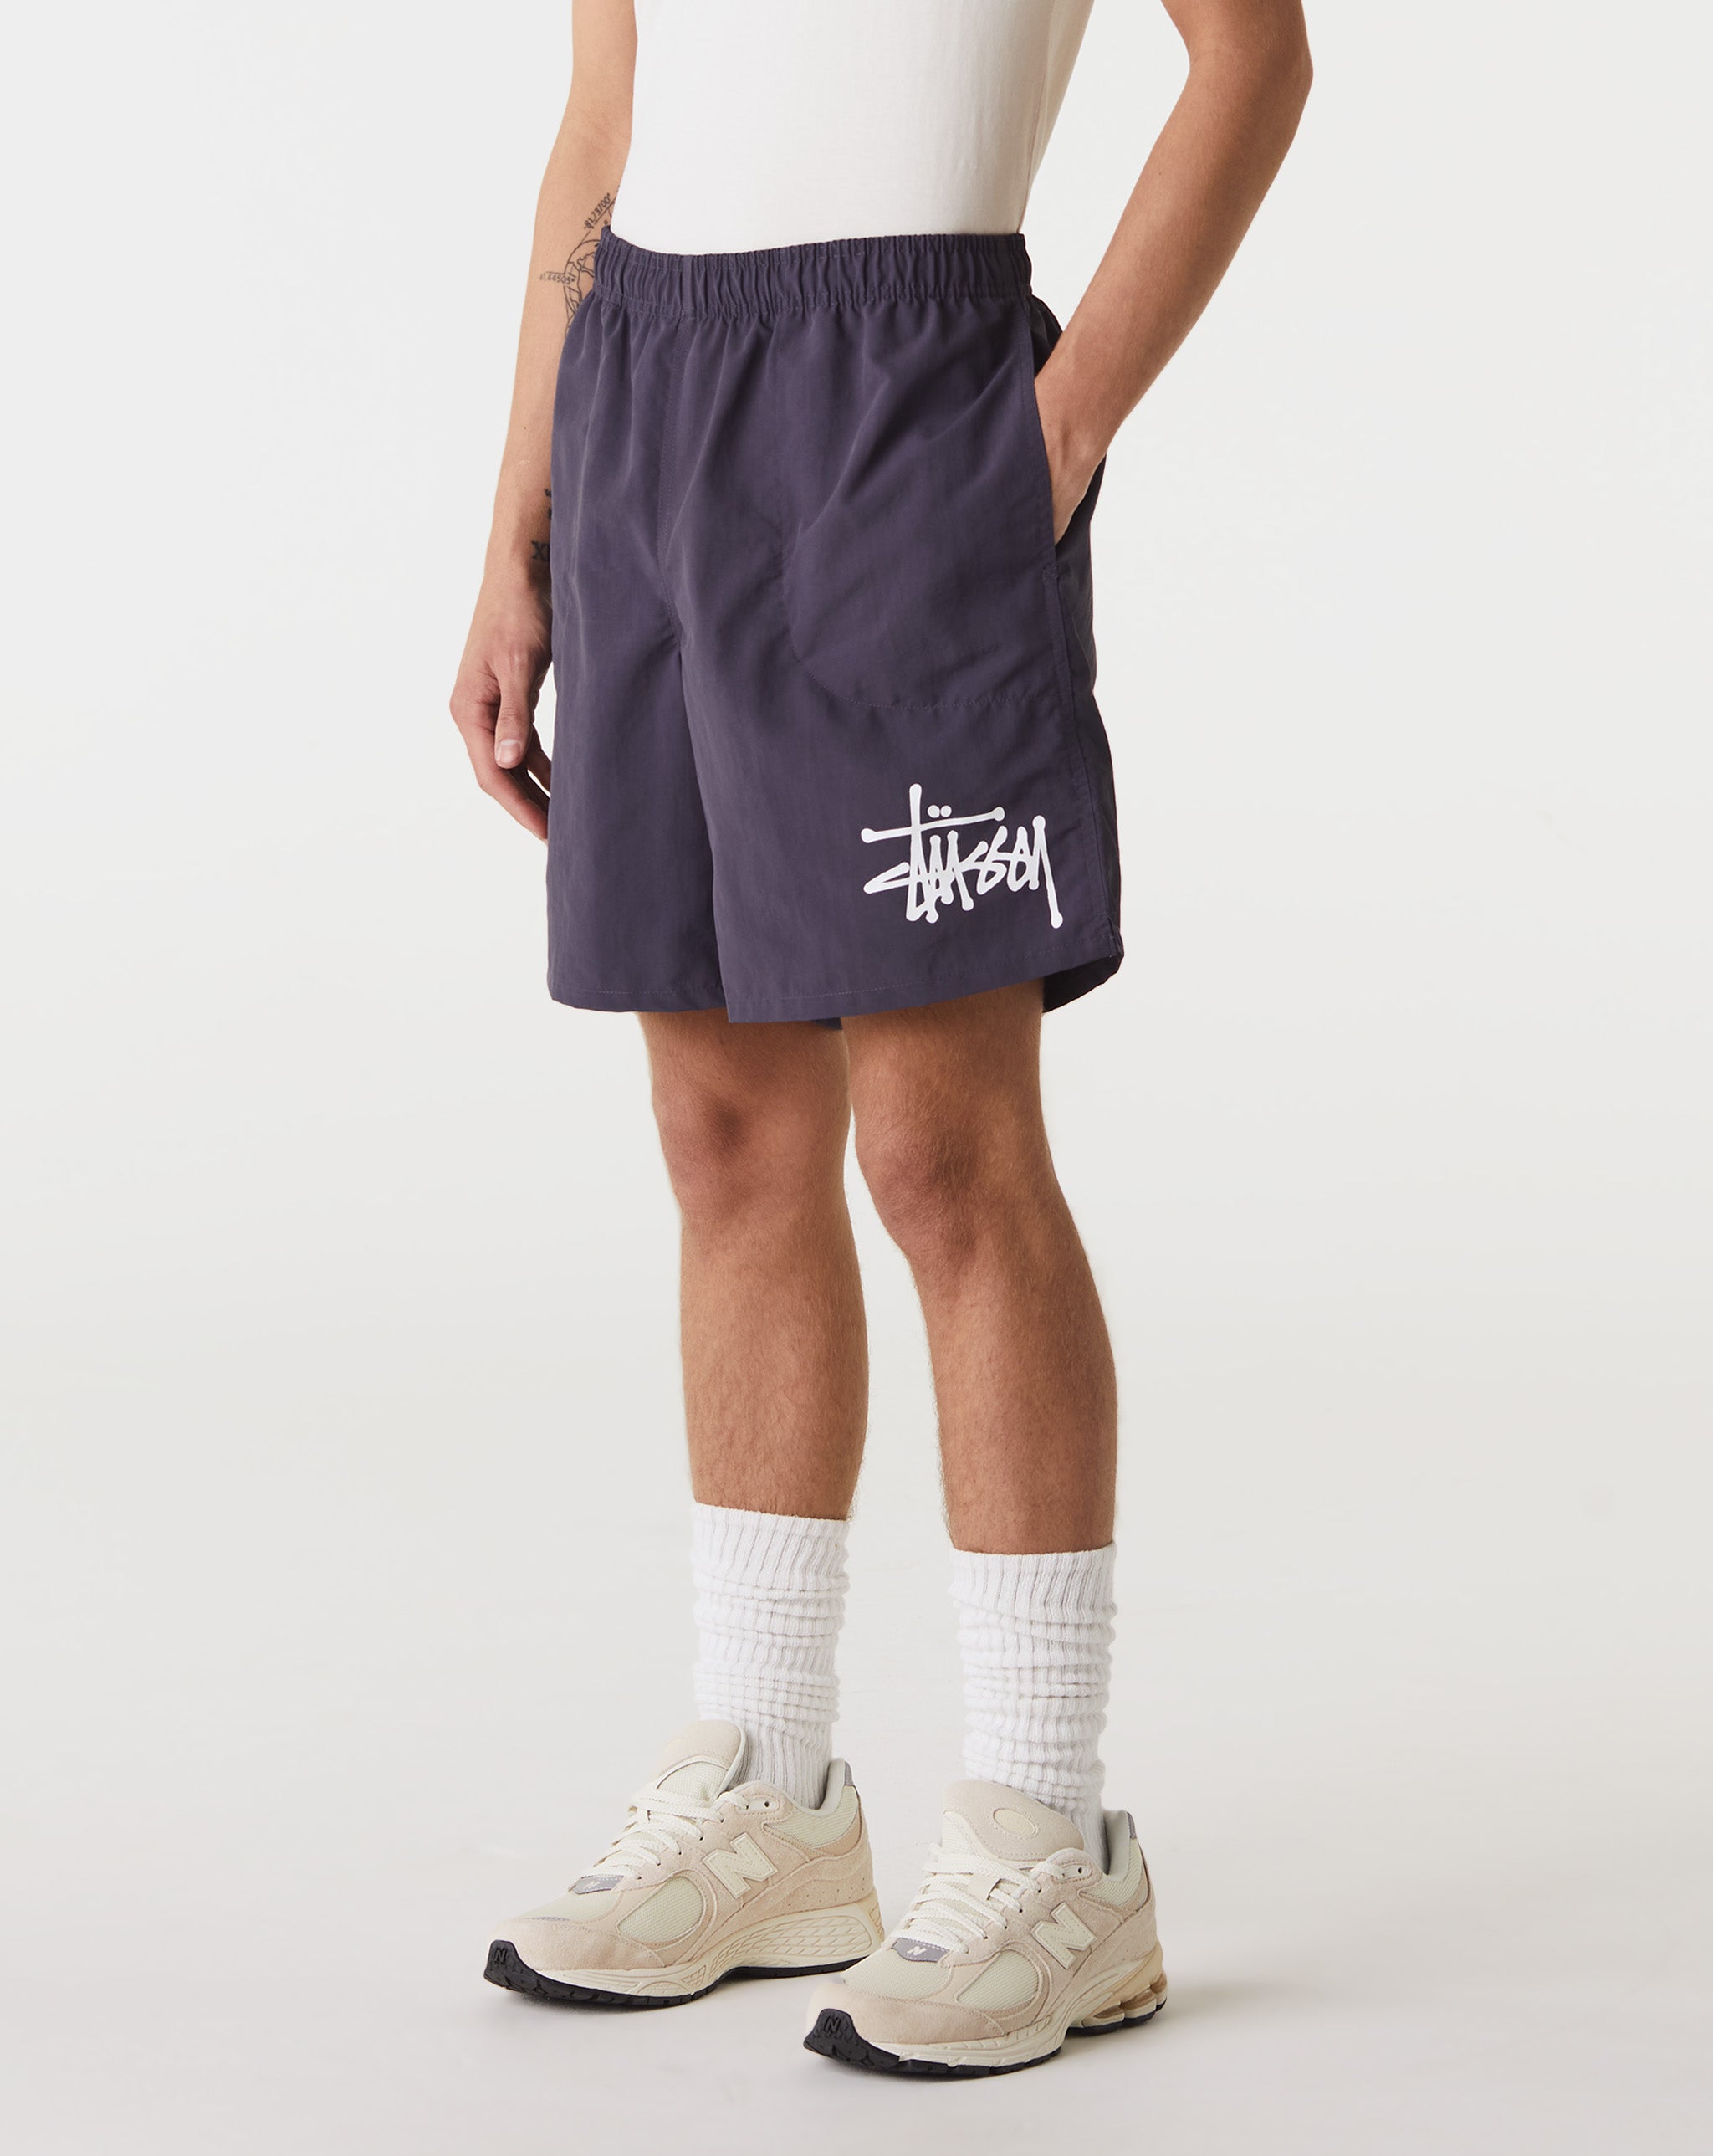 Stüssy Looks Right Out of a 'Jungle Cruise' in a Ribbed Green Dress & Buzzy Wrap Sandals  - Cheap Cerbe Jordan outlet